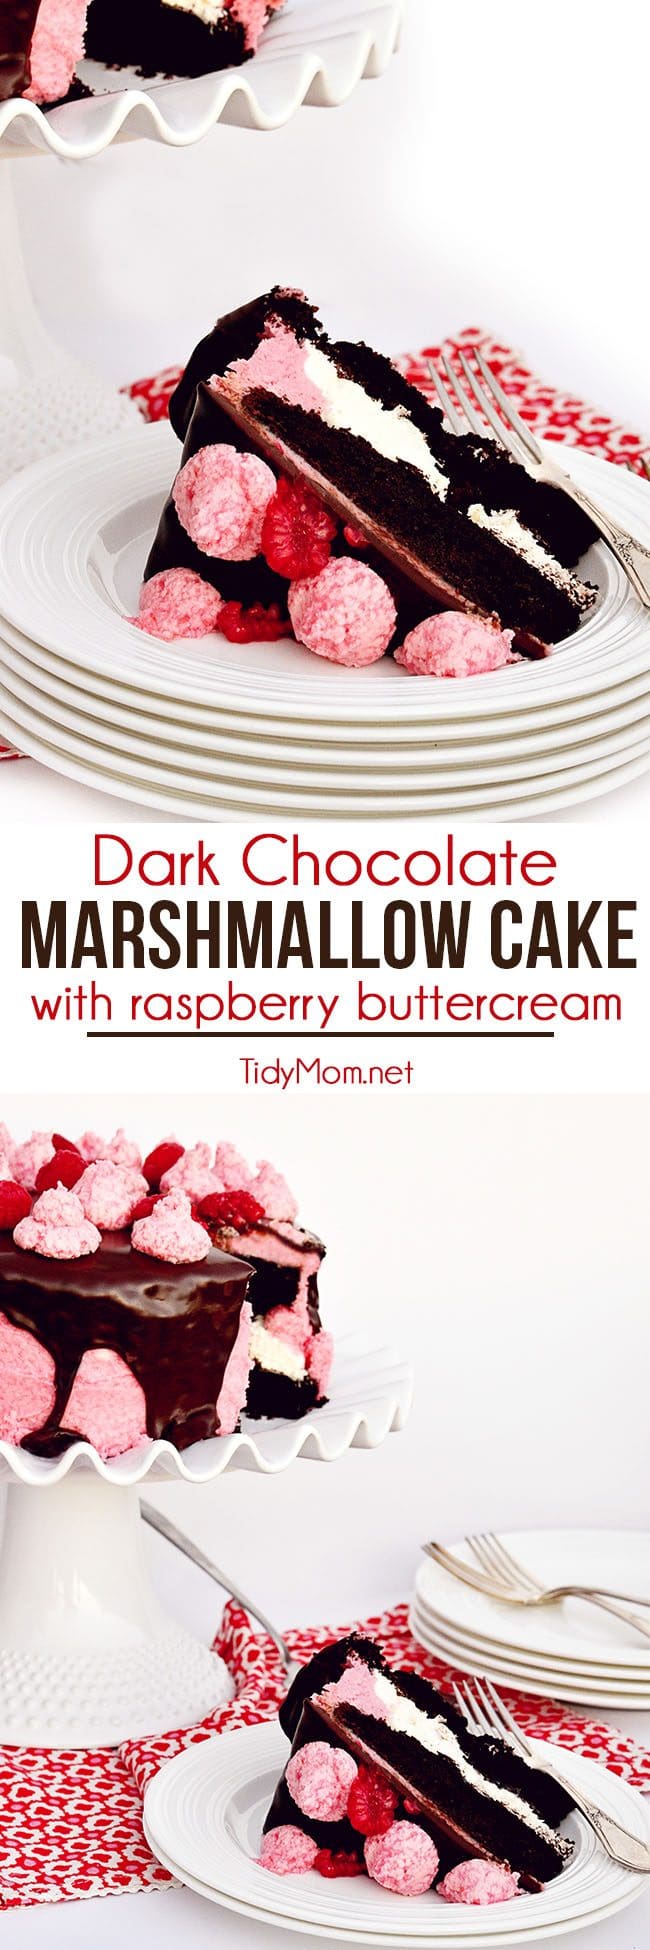 Dark chocolate, toasted marshmallow and raspberries is a delicious combination for a baby shower, birthday party, and perfect for Valentine's Day. Dark Chocolate Covered Marshmallow Cake with Raspberry Buttercream recipe at TidyMom.net